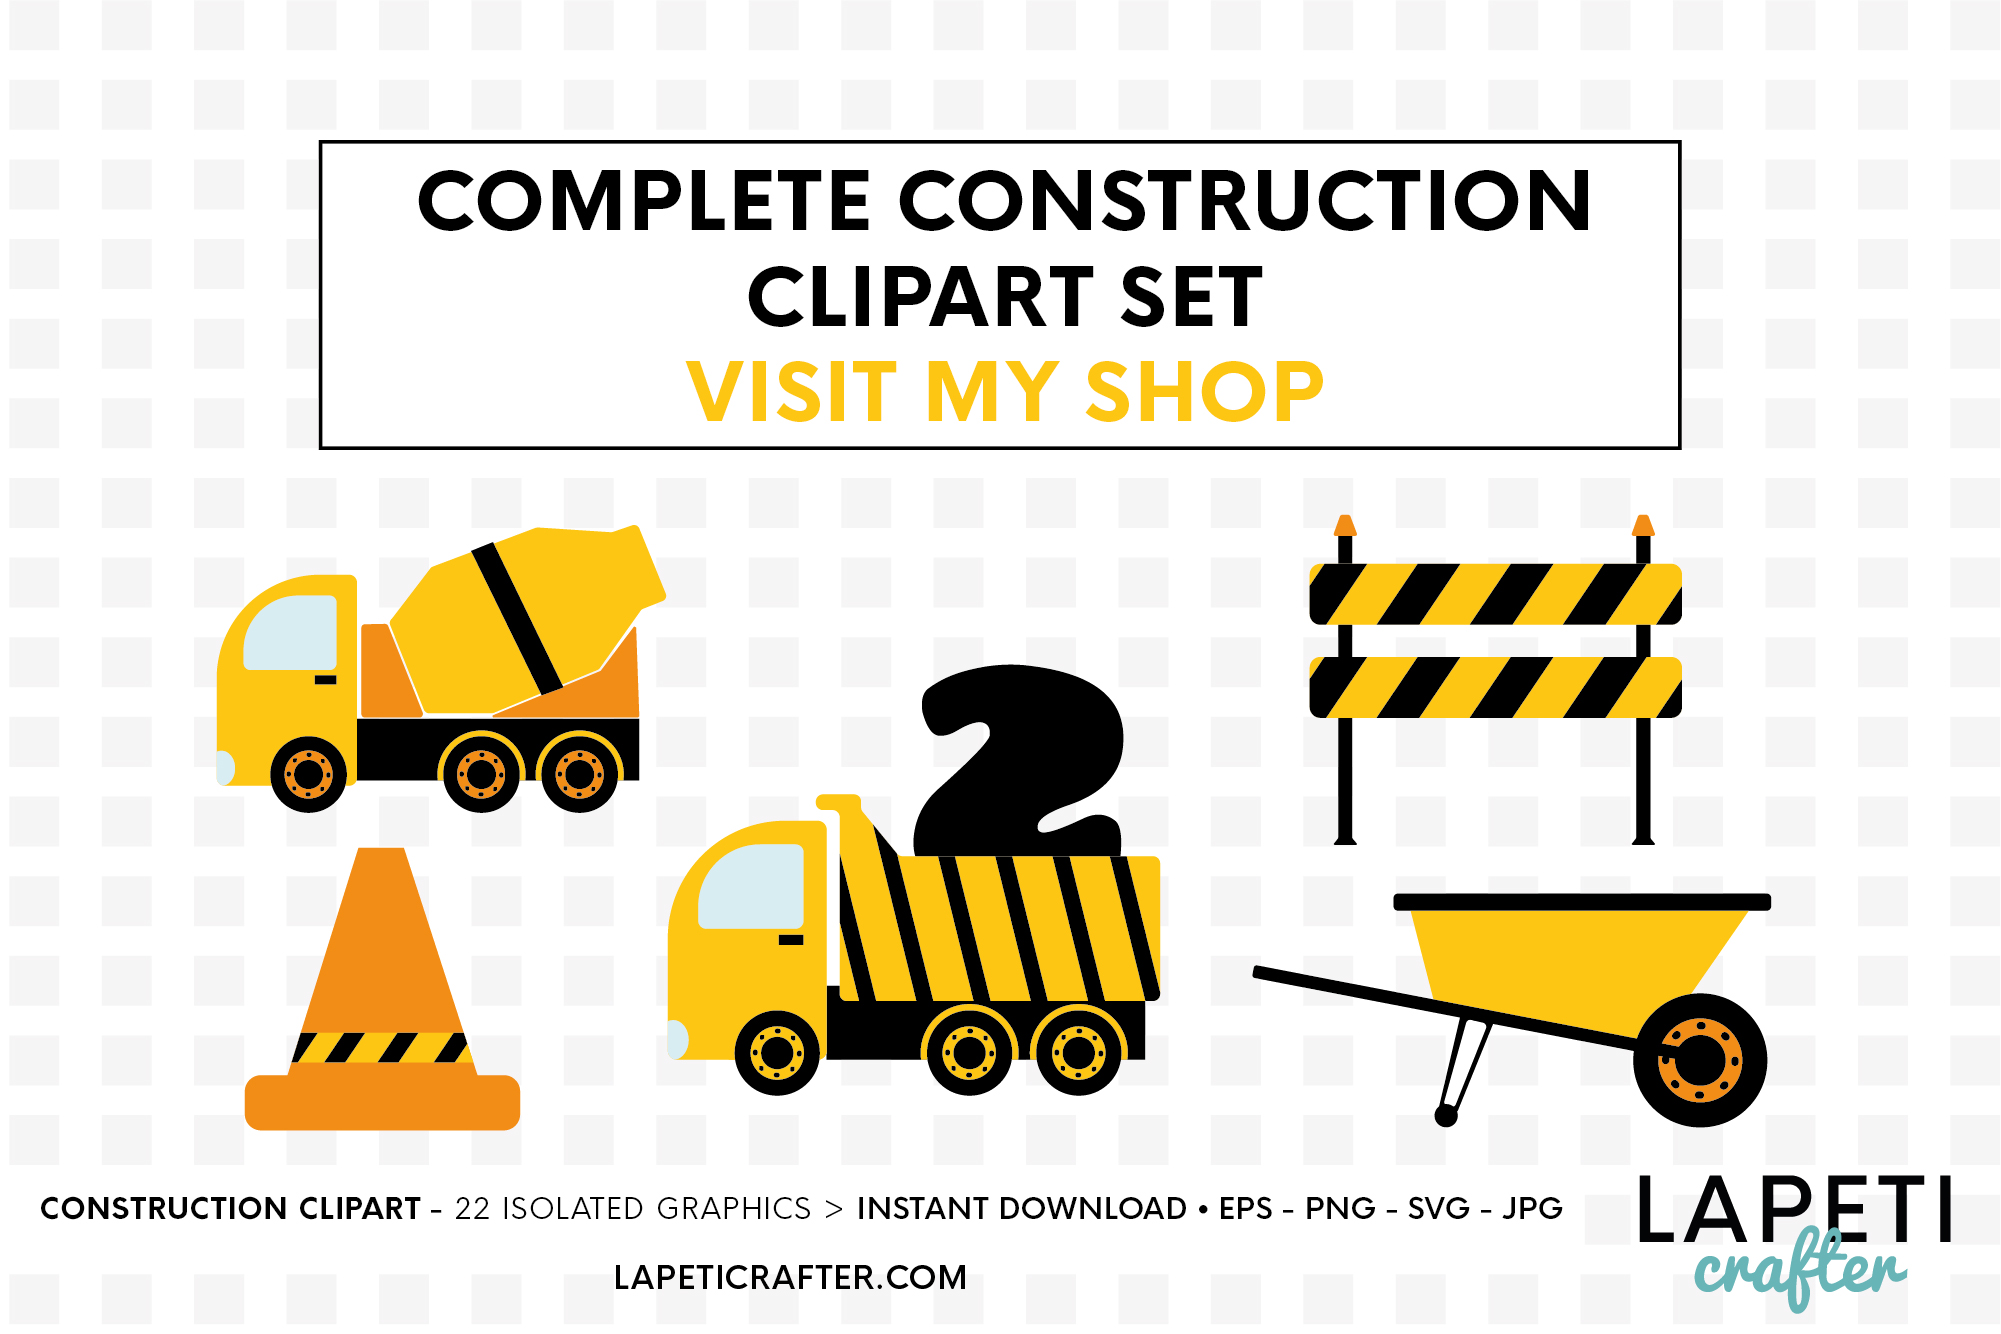 Download Construction birthday numbers, yellow excavator clipart